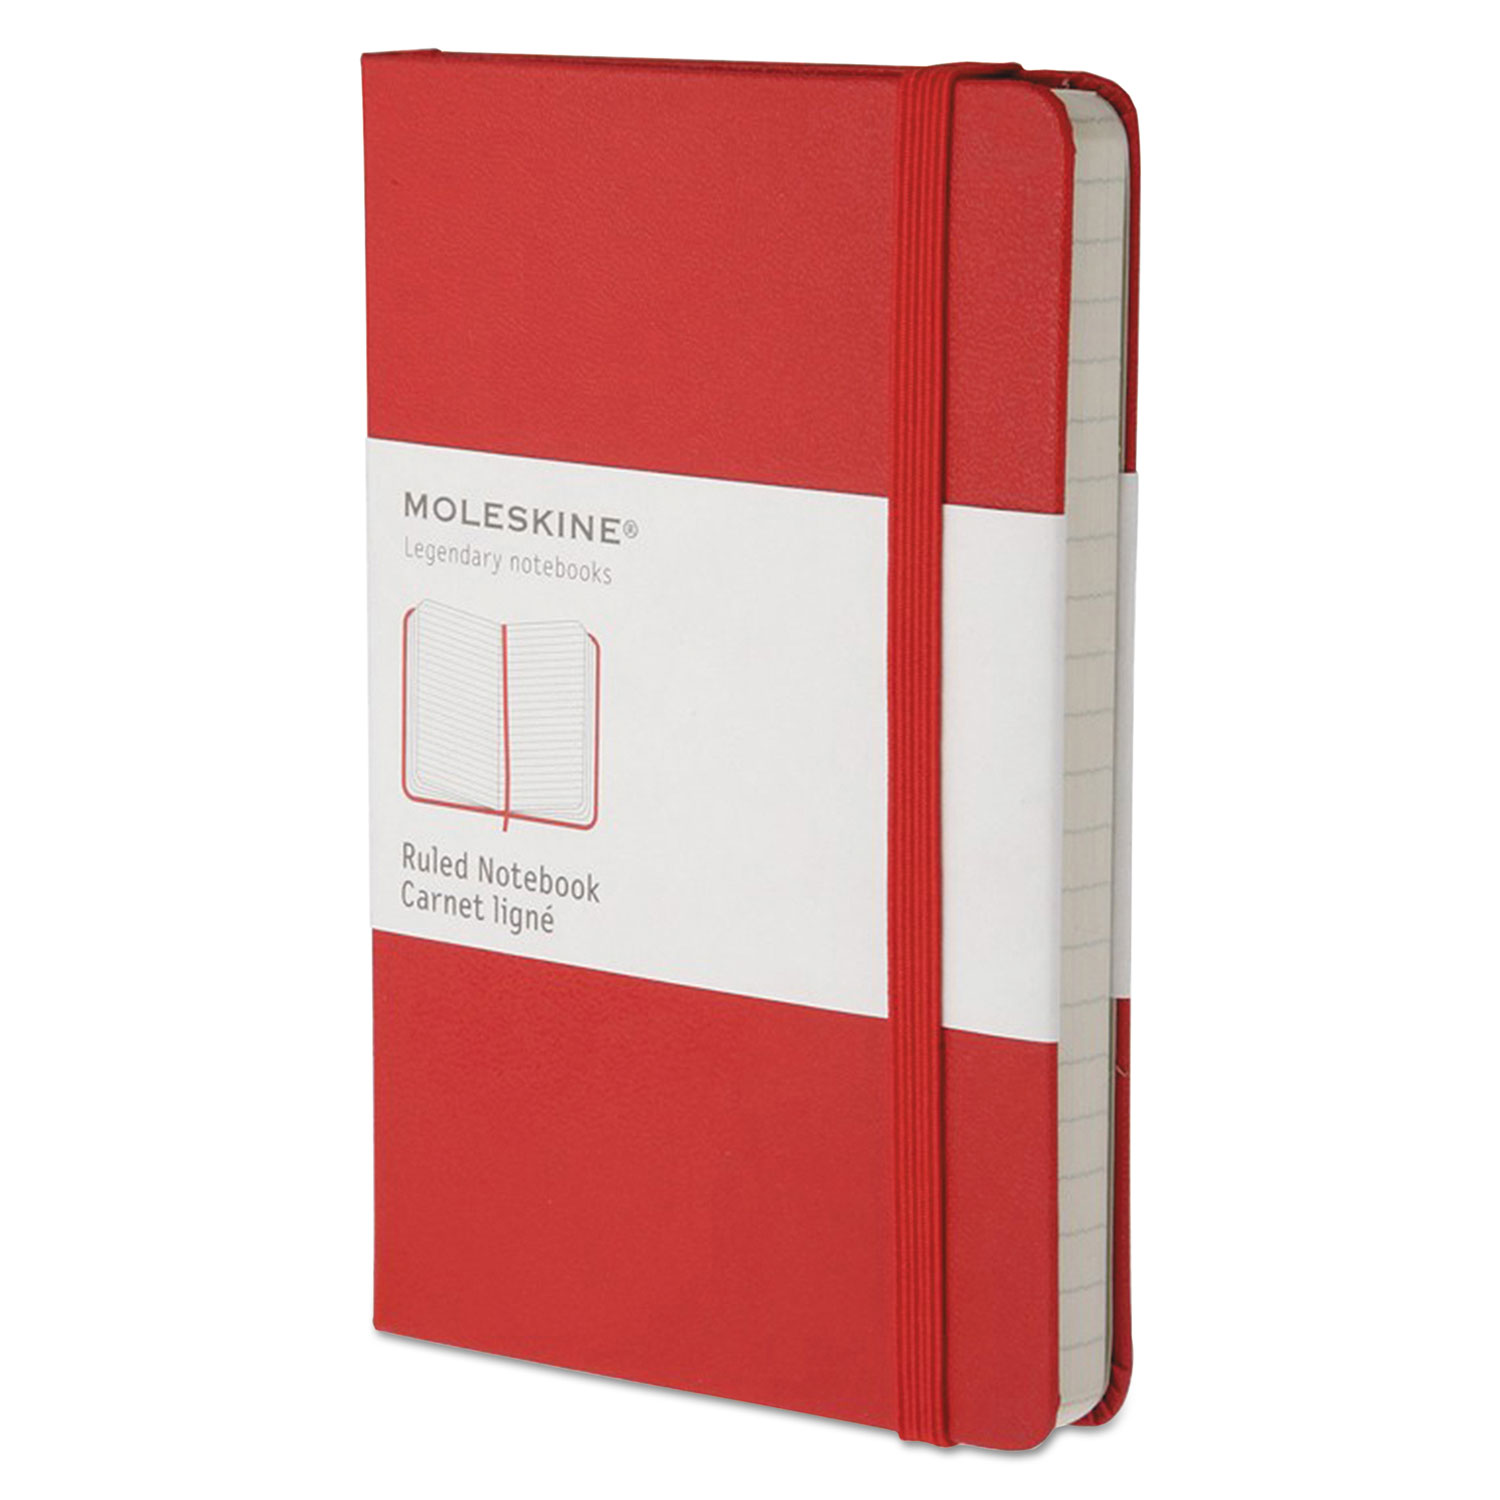  Moleskine MM710R Hard Cover Notebook, Narrow Rule, Red Cover, 5.5 x 3.5, 192 Sheets (HBGMM710R) 